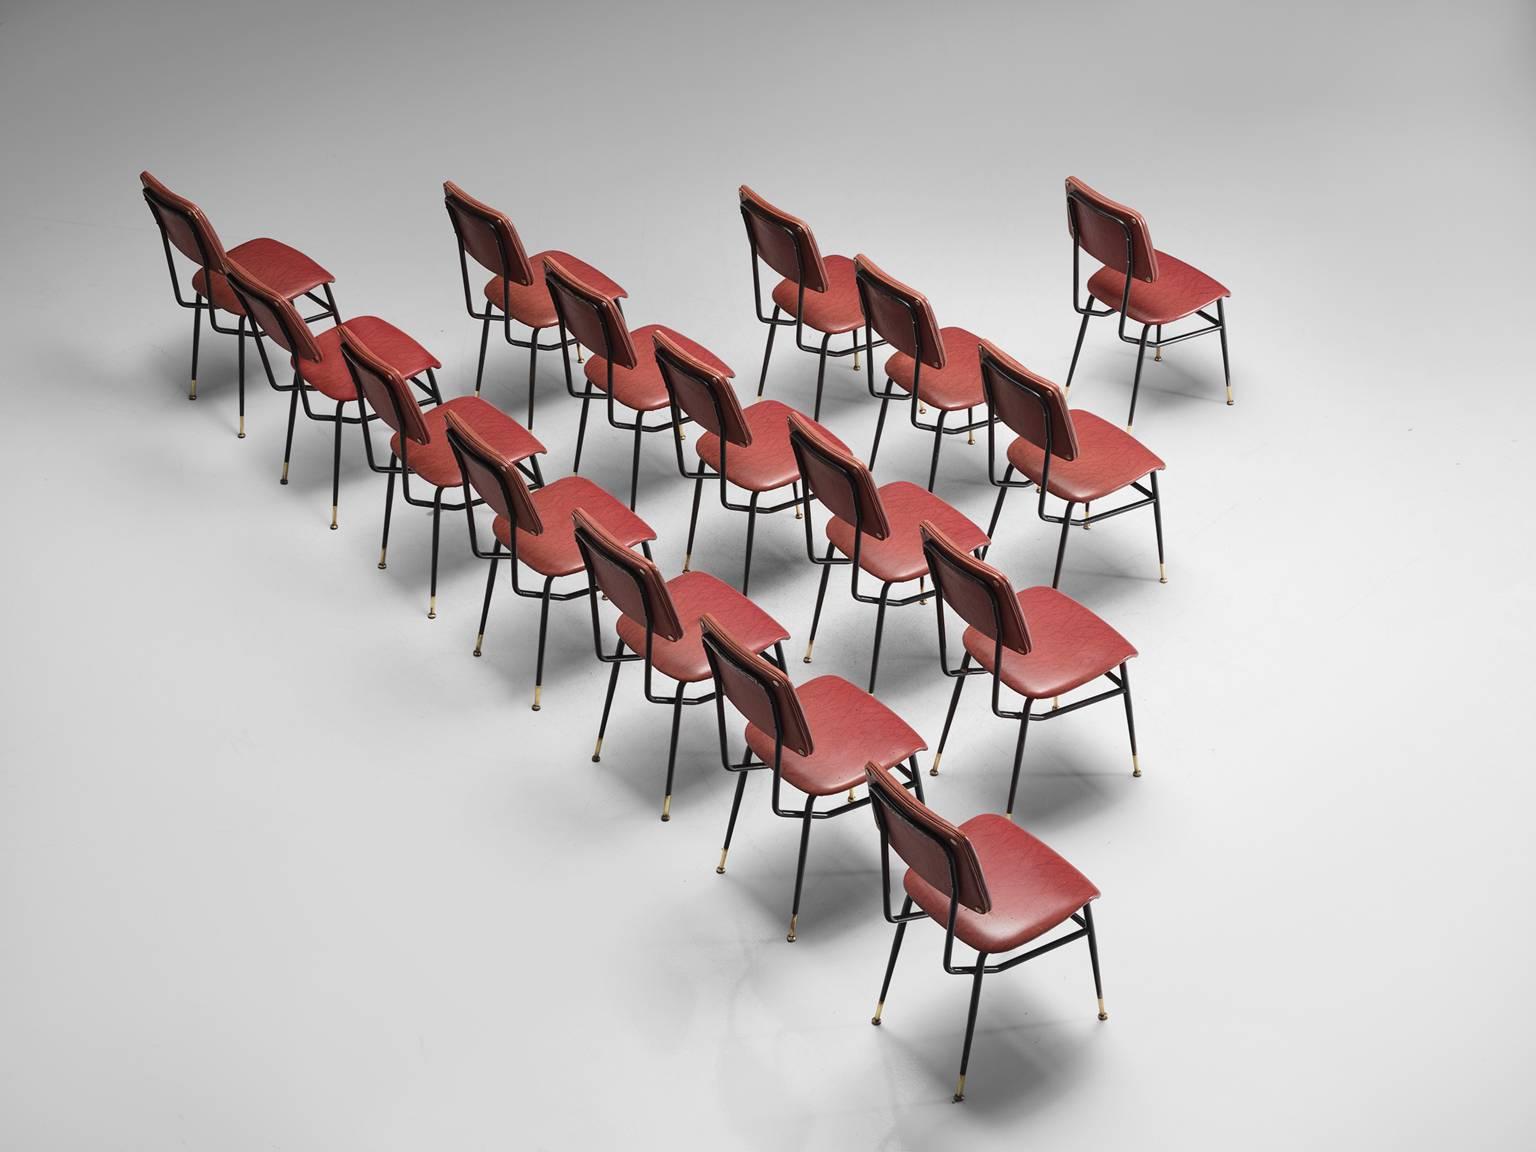 Studio Architects BBPR (attributed), set of sixteen chairs, red faux leather, metal, brass, Italy, 1950s

This 16 chairs with varnished metal rod structure are upholstered with reddish pink leatherette. The chairs are delicate and slender yet strong